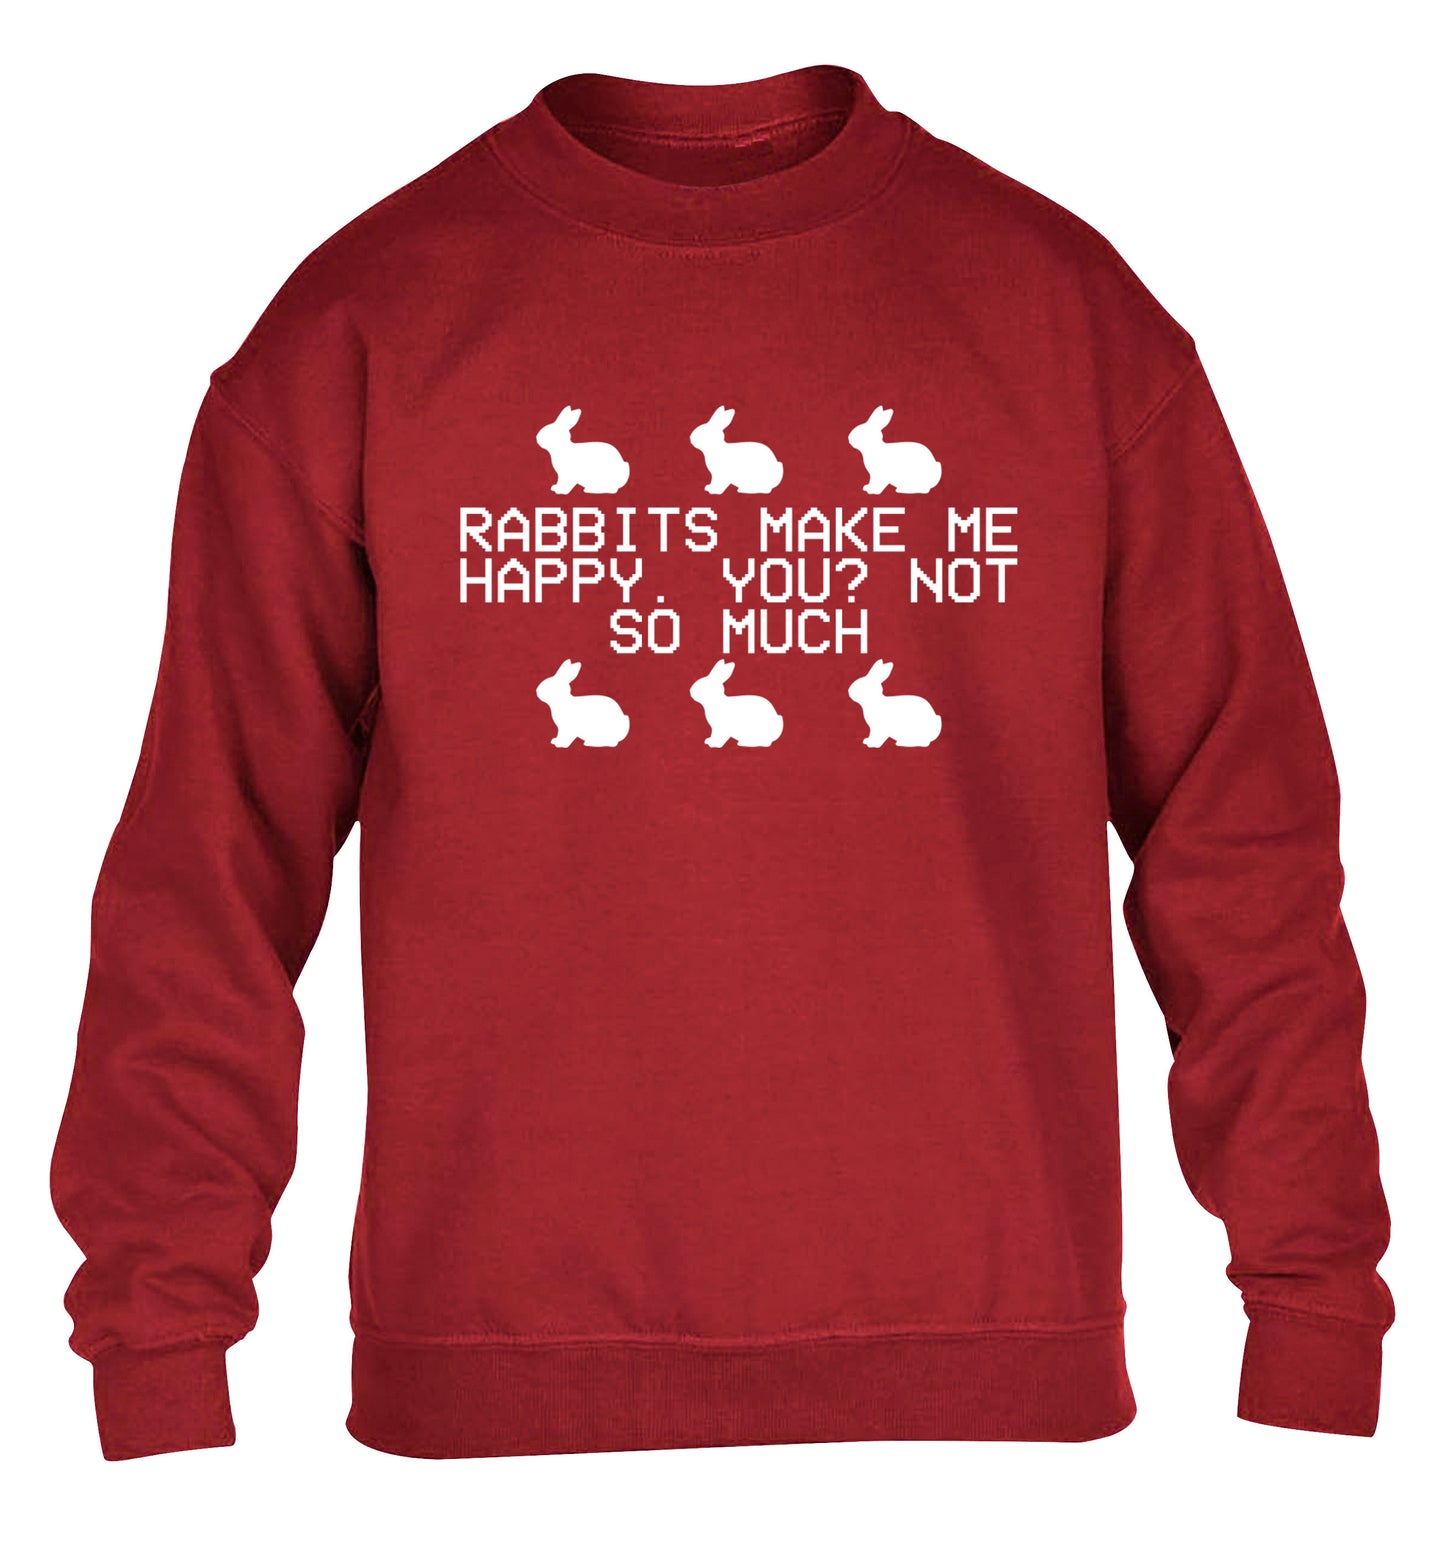 Rabbits make me happy, you not so much children's grey  sweater 12-14 Years